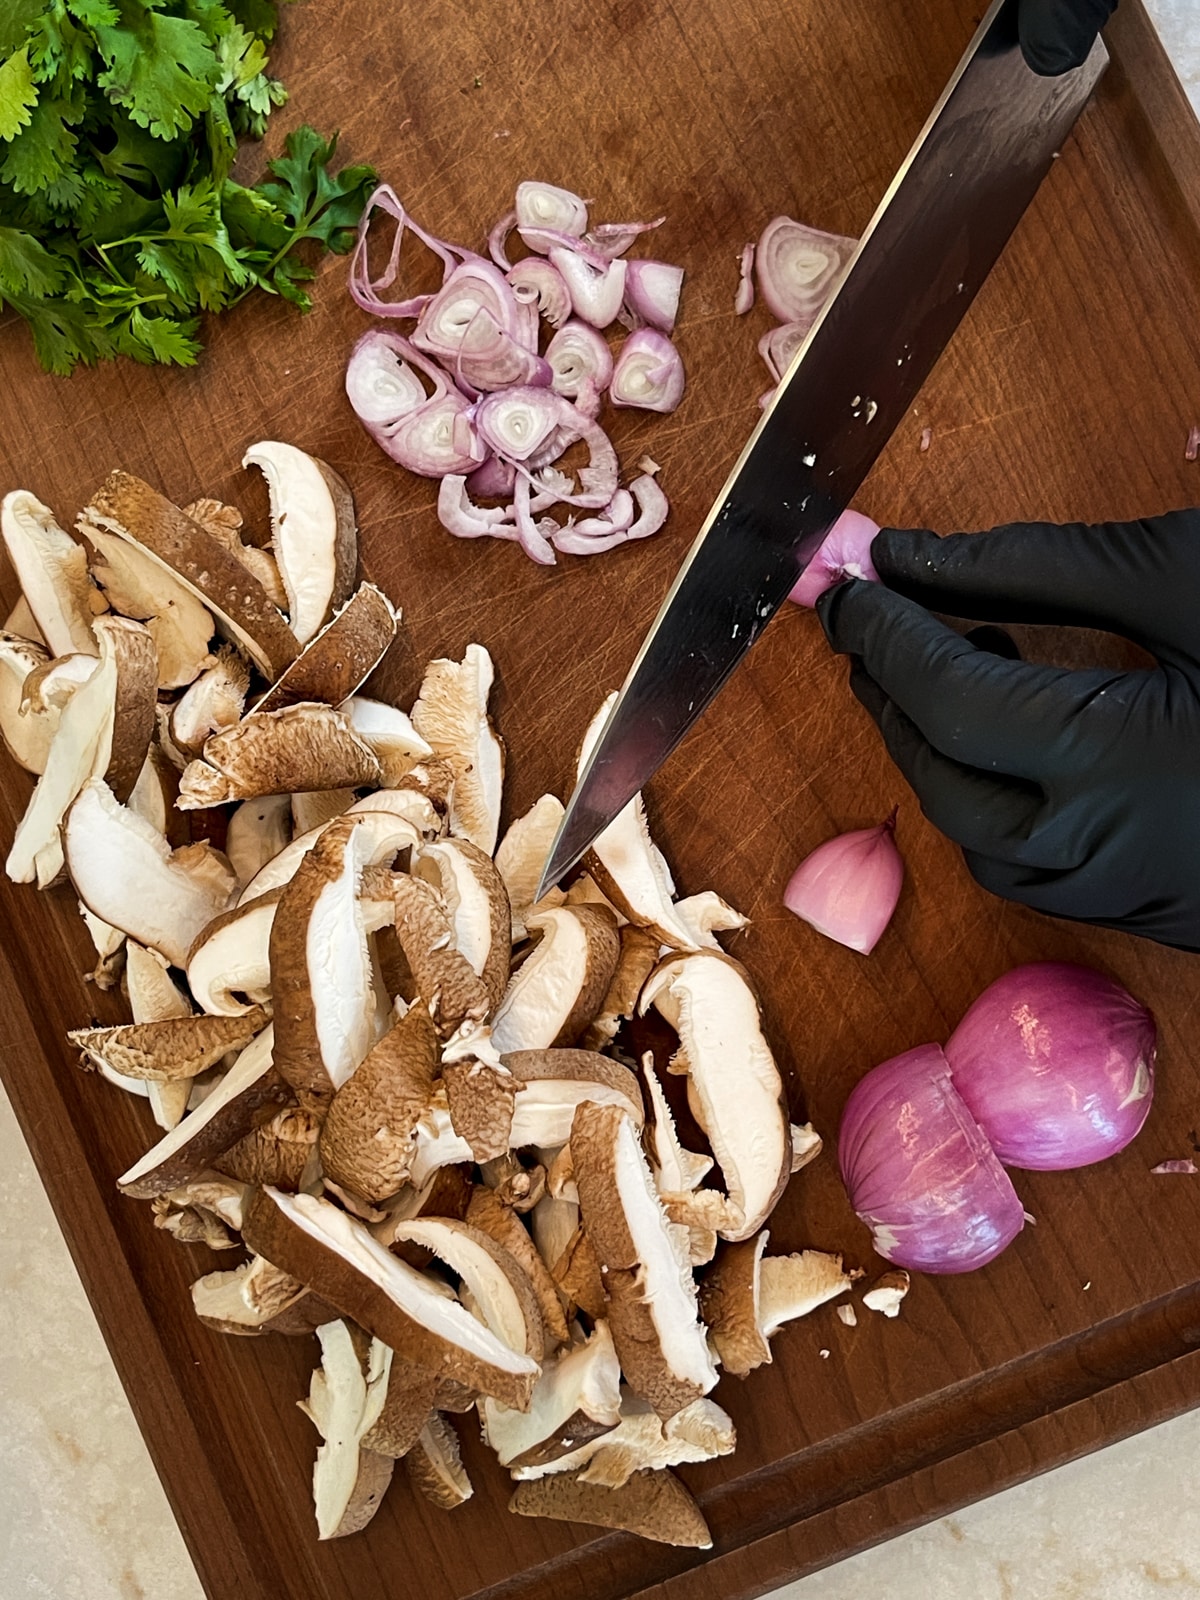 Slicing shallots on a cutting board with sliced shiitake mushrooms, and cilantro on the side.